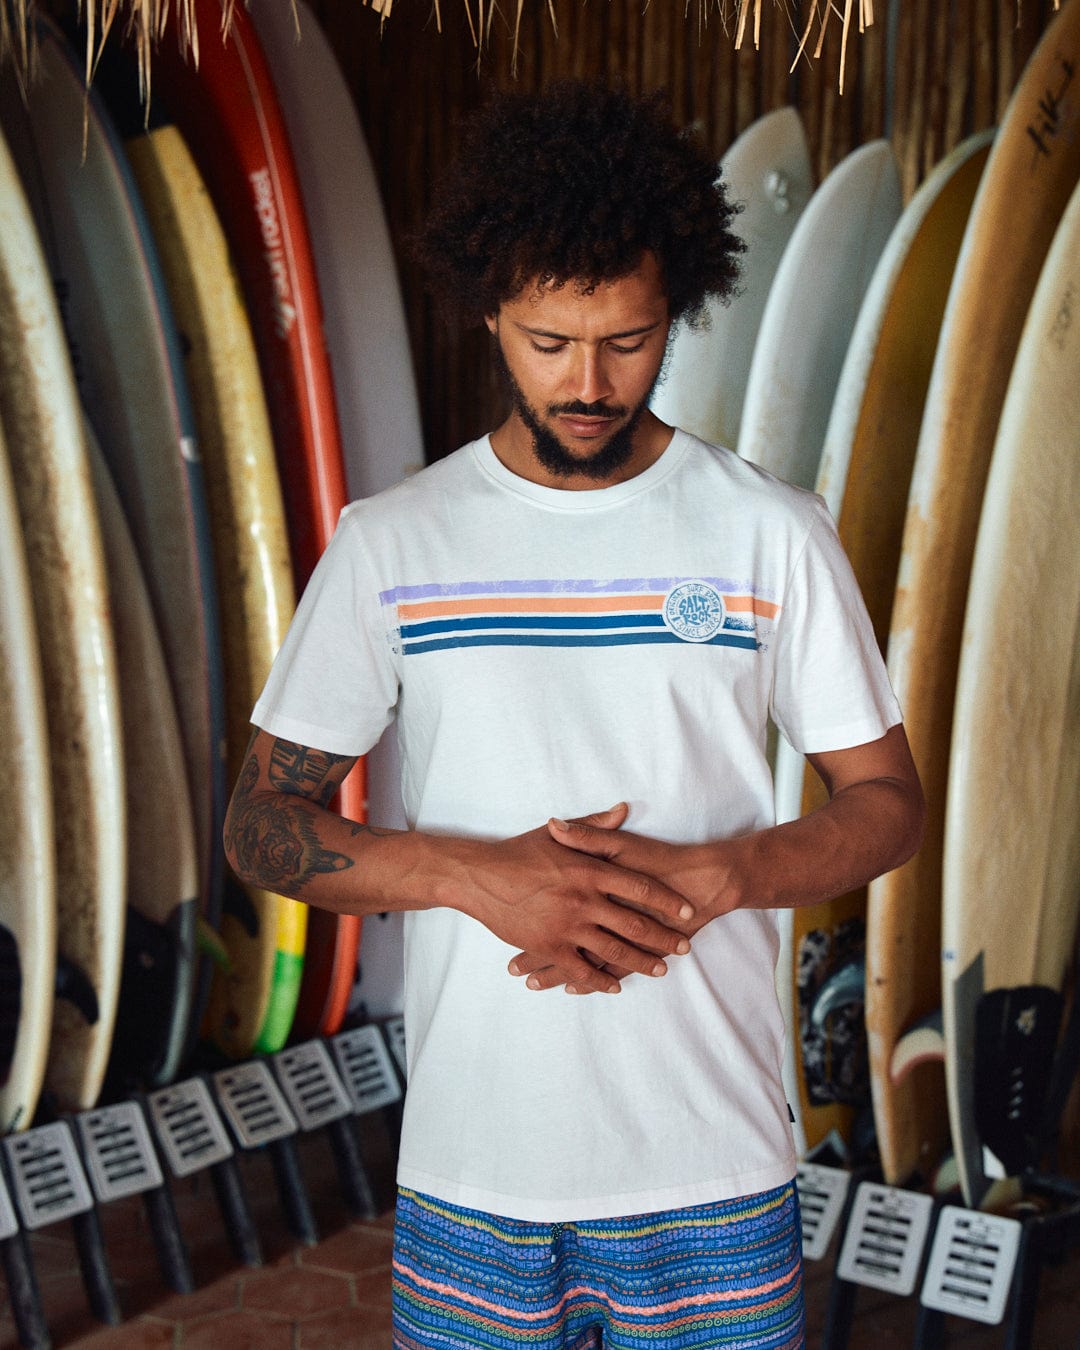 A man stands with his hands clasped in front of a rack of surfboards, wearing the Saltrock Spray Stripe - Mens Short Sleeve T-Shirt - White and patterned blue shorts, proudly displaying the Saltrock branding.